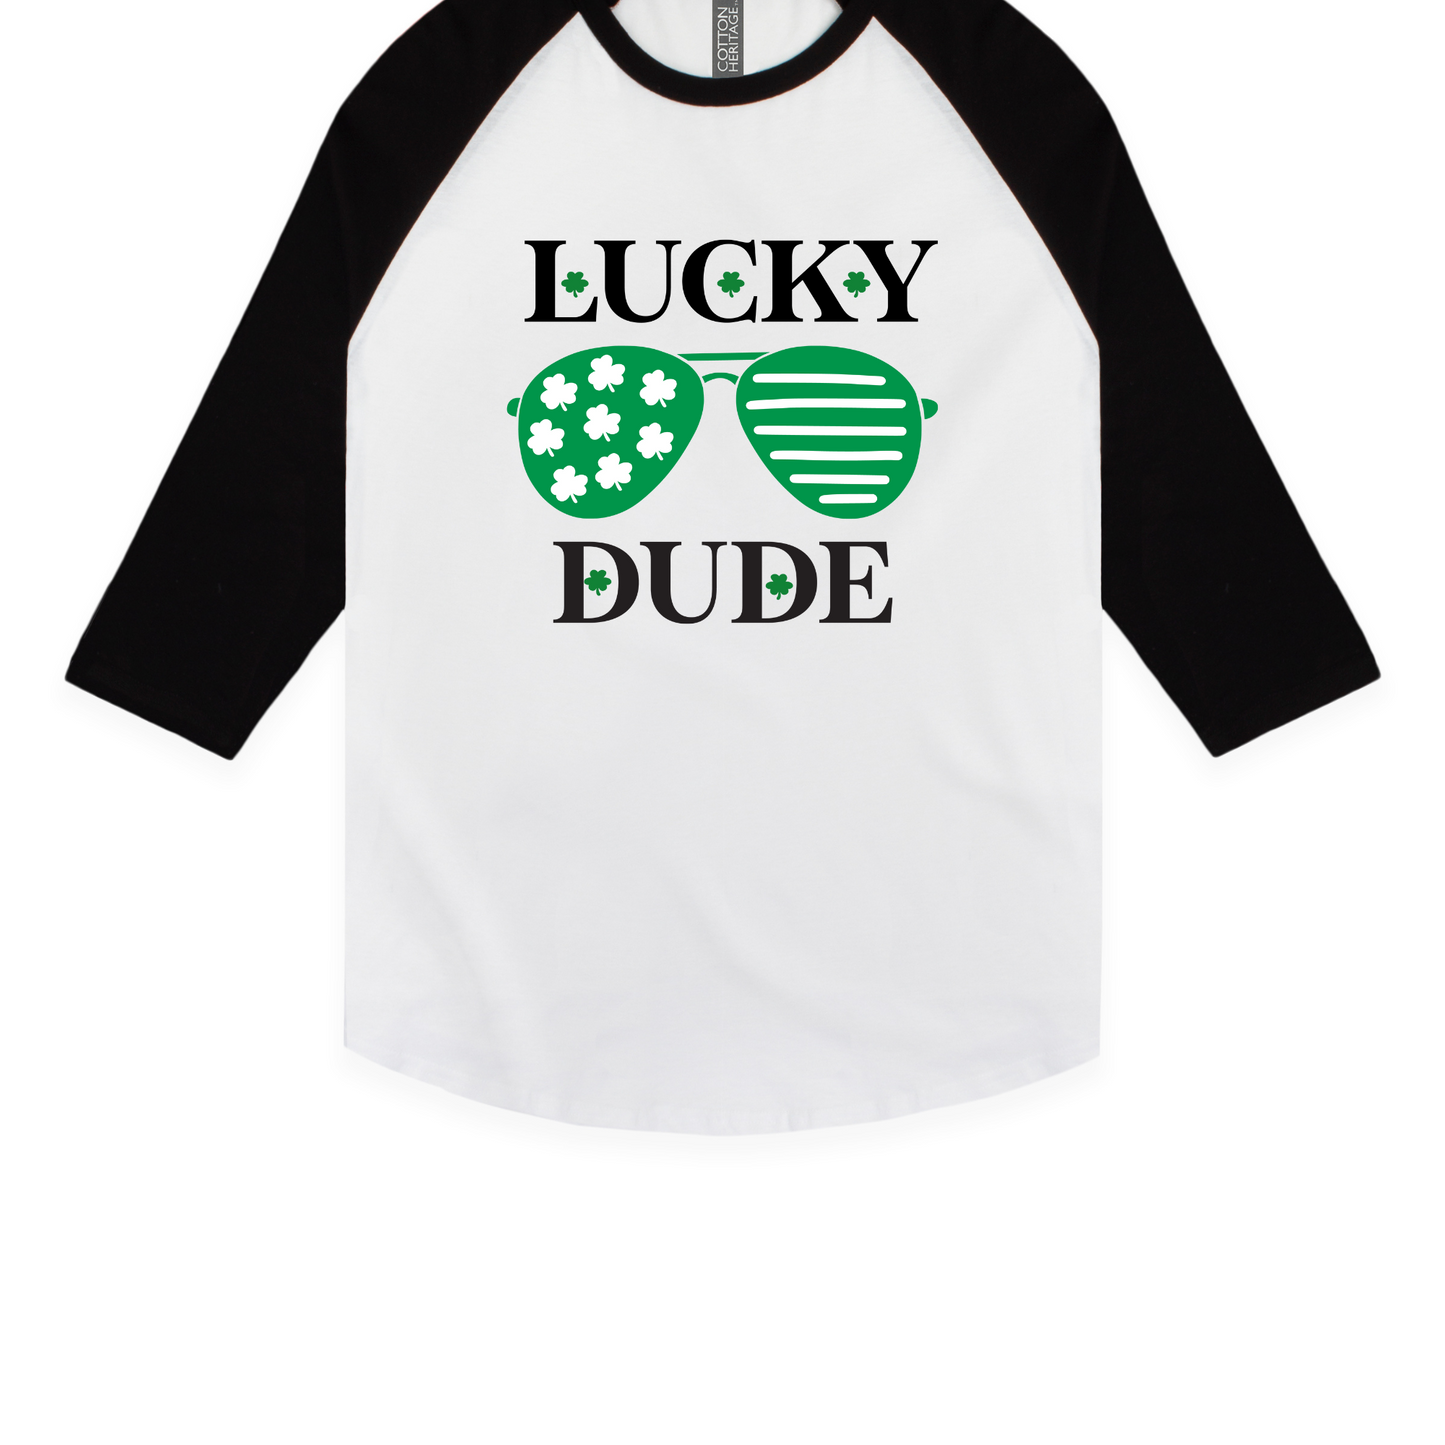 Lucky Dude Graphic Tee